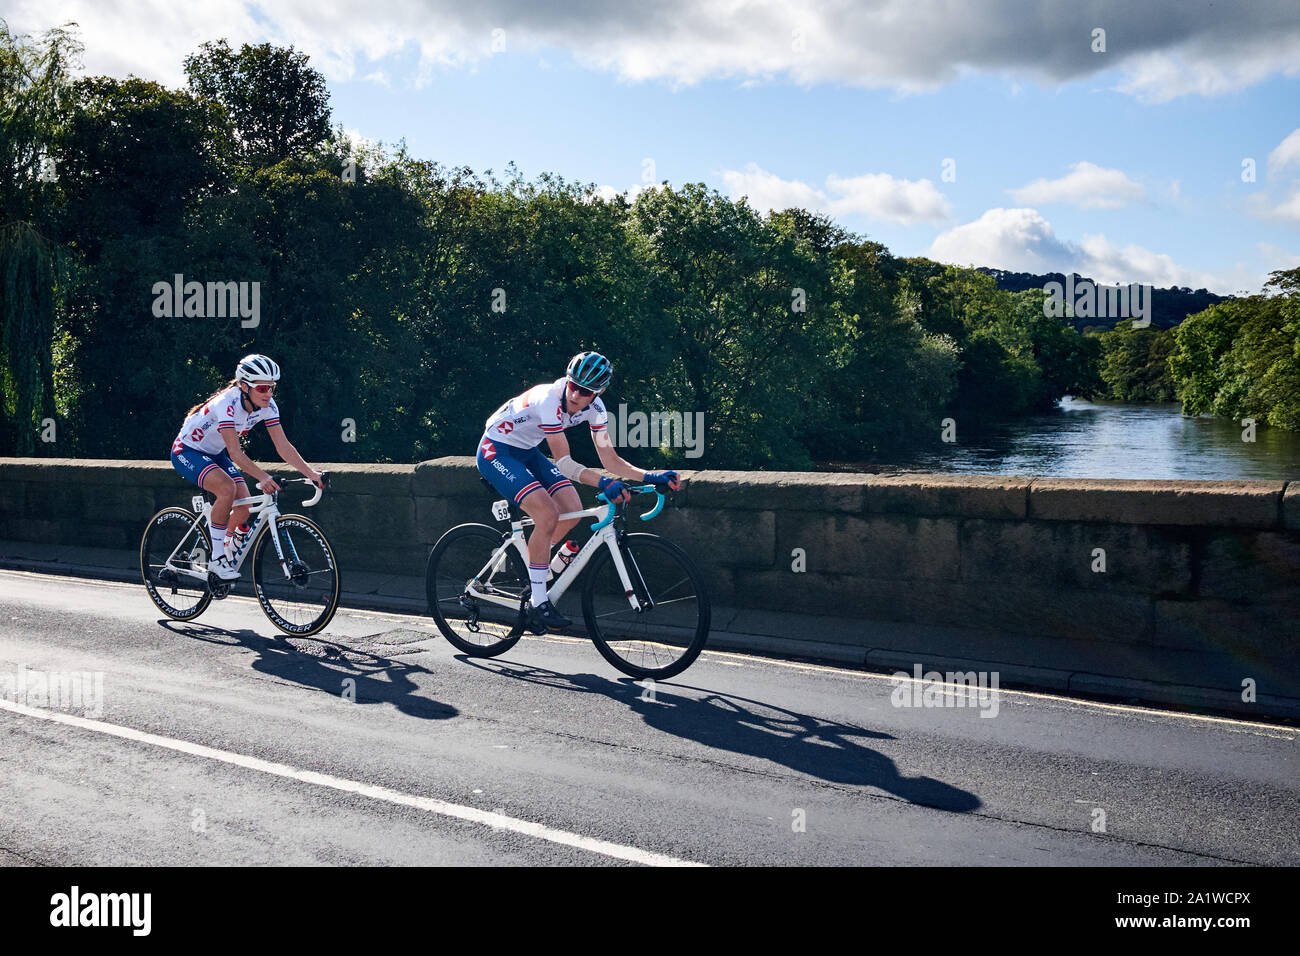 Otley, Yorkshire / UK - September 28th 2019: Lizzie Deignan passes over the river Wharfe, Otley in the UCI Road World Championships 2019 Women's race Stock Photo